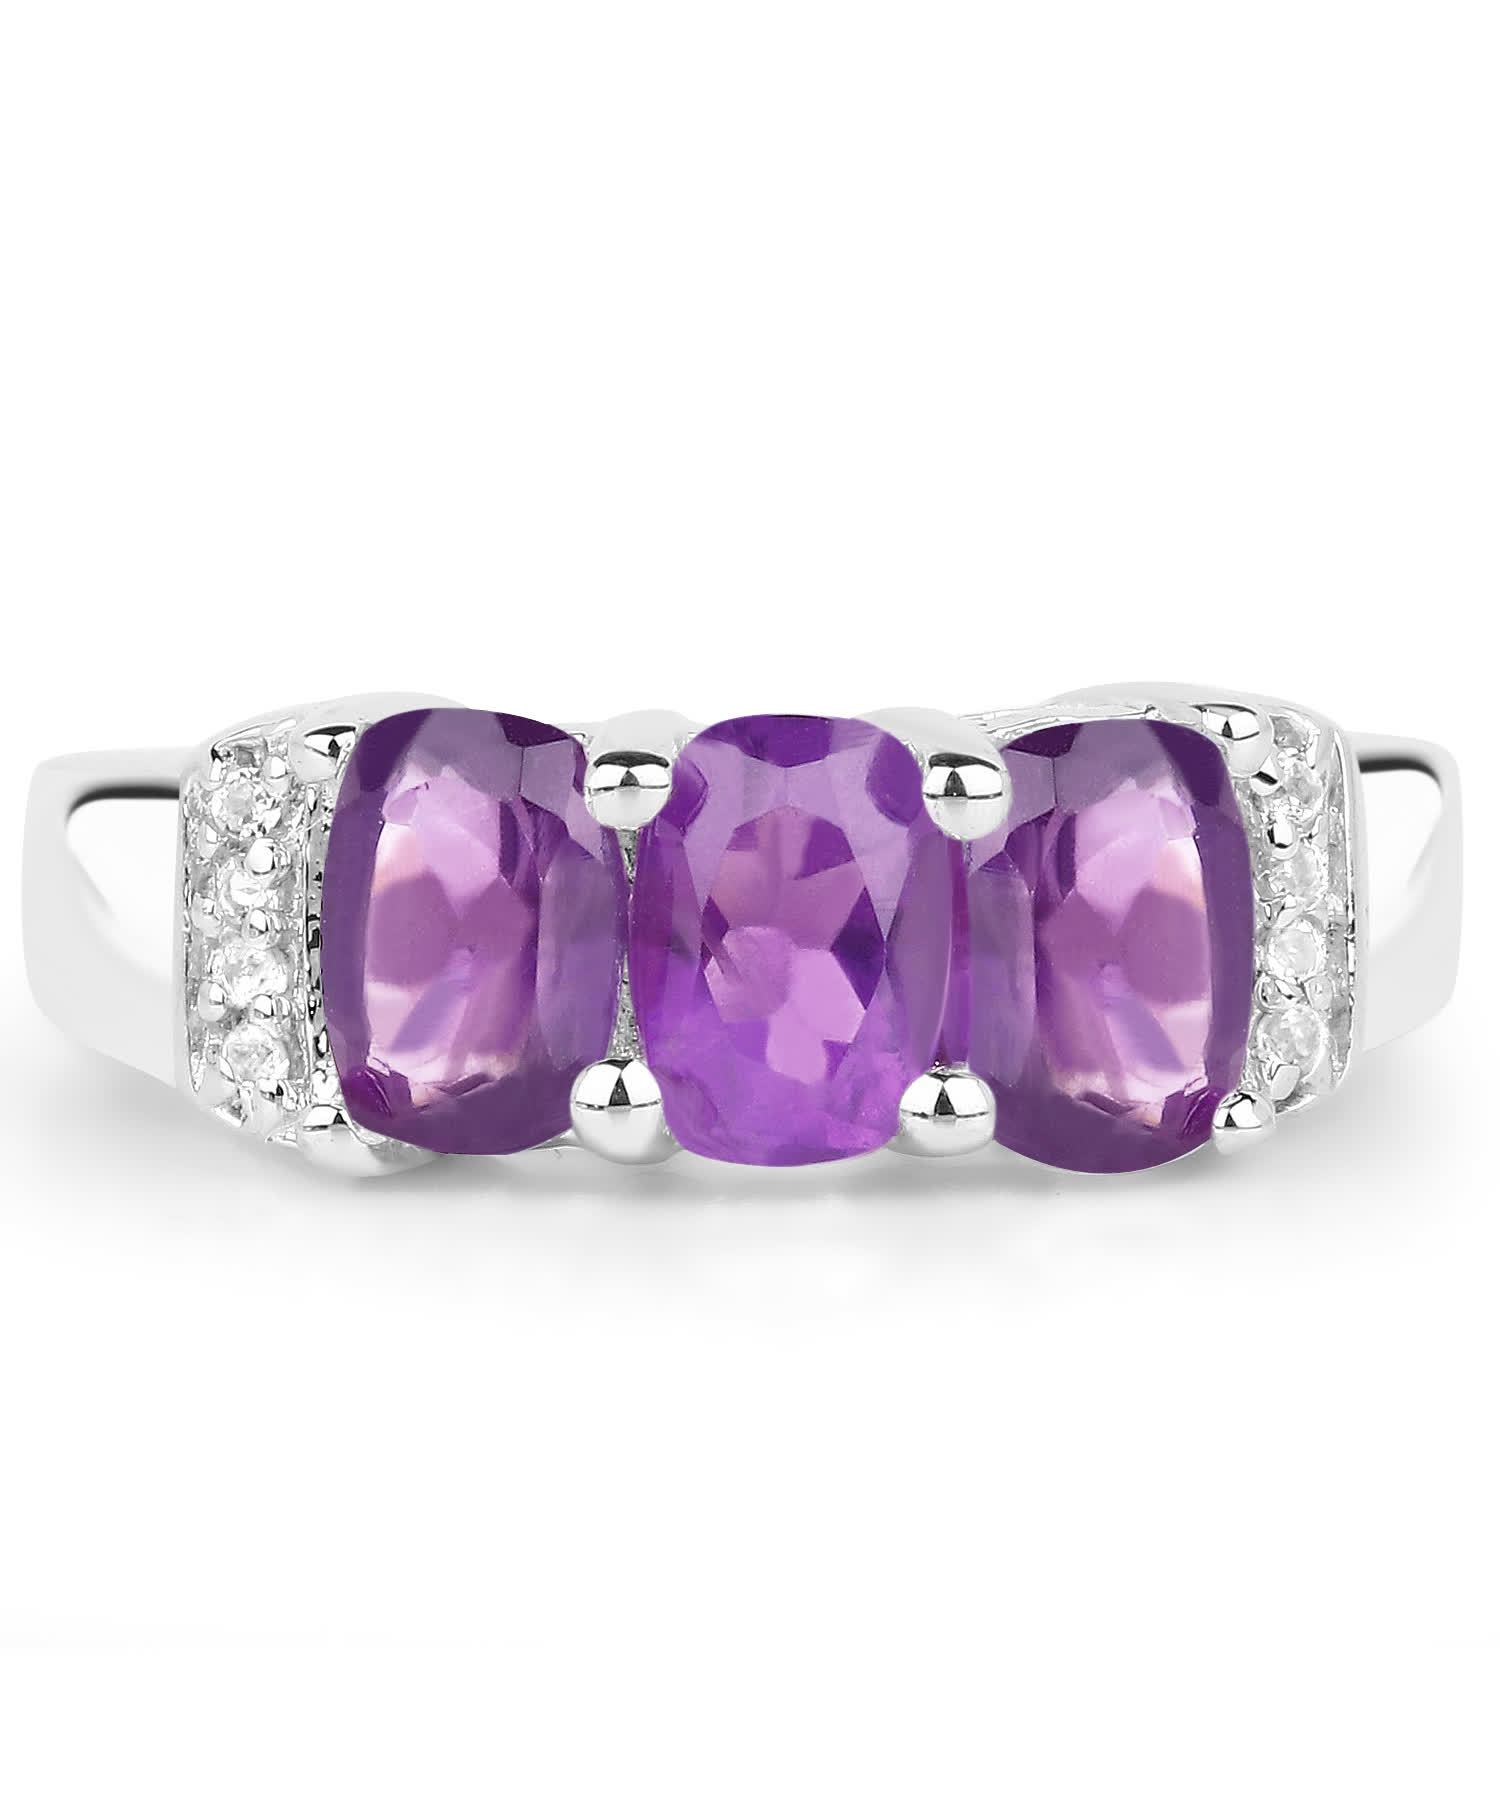 1.54ctw Natural Amethyst and Topaz Rhodium Plated 925 Sterling Silver Three-Stone Right Hand Ring View 3